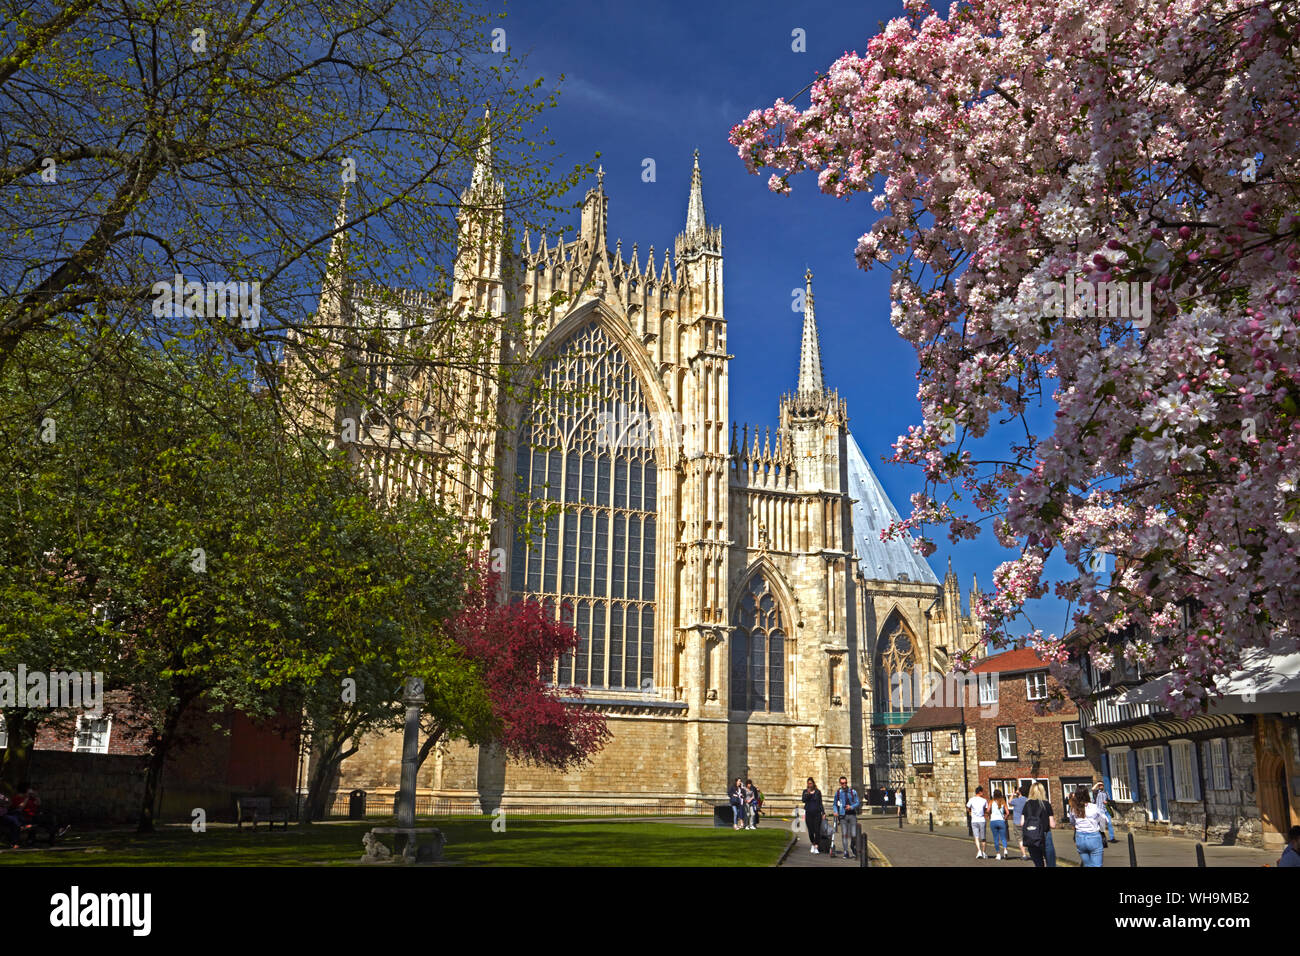 The east front of York Minster seen from St. William's College, York, North Yorkshire, England, United Kingdom, Europe Stock Photo